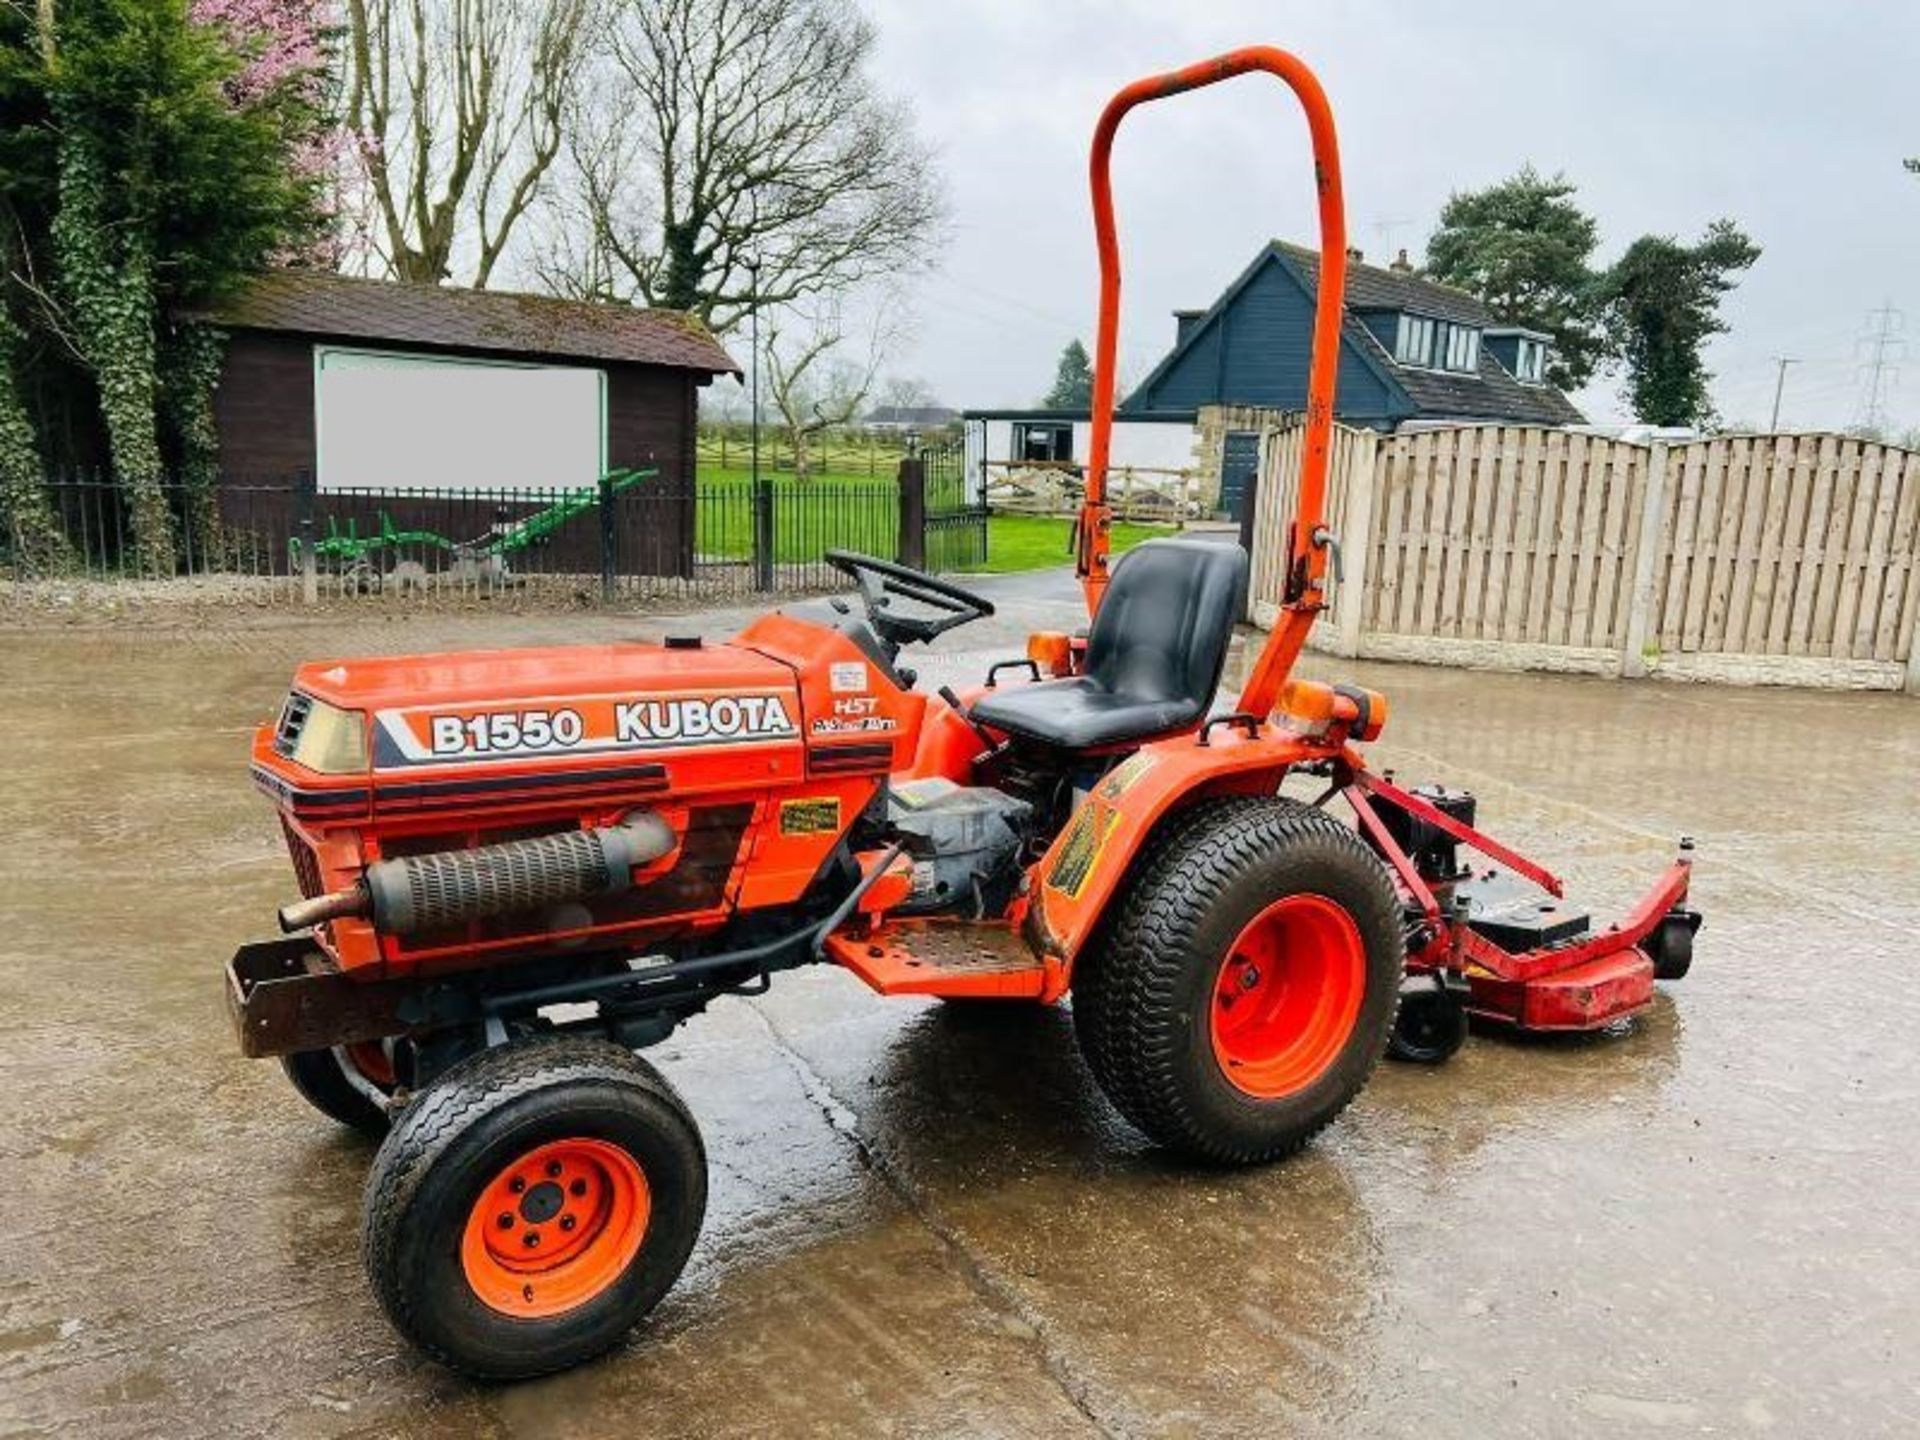 KUBOTA B1550 COMPACT TRACTOR C/W ROLE BAR AND TOPPER